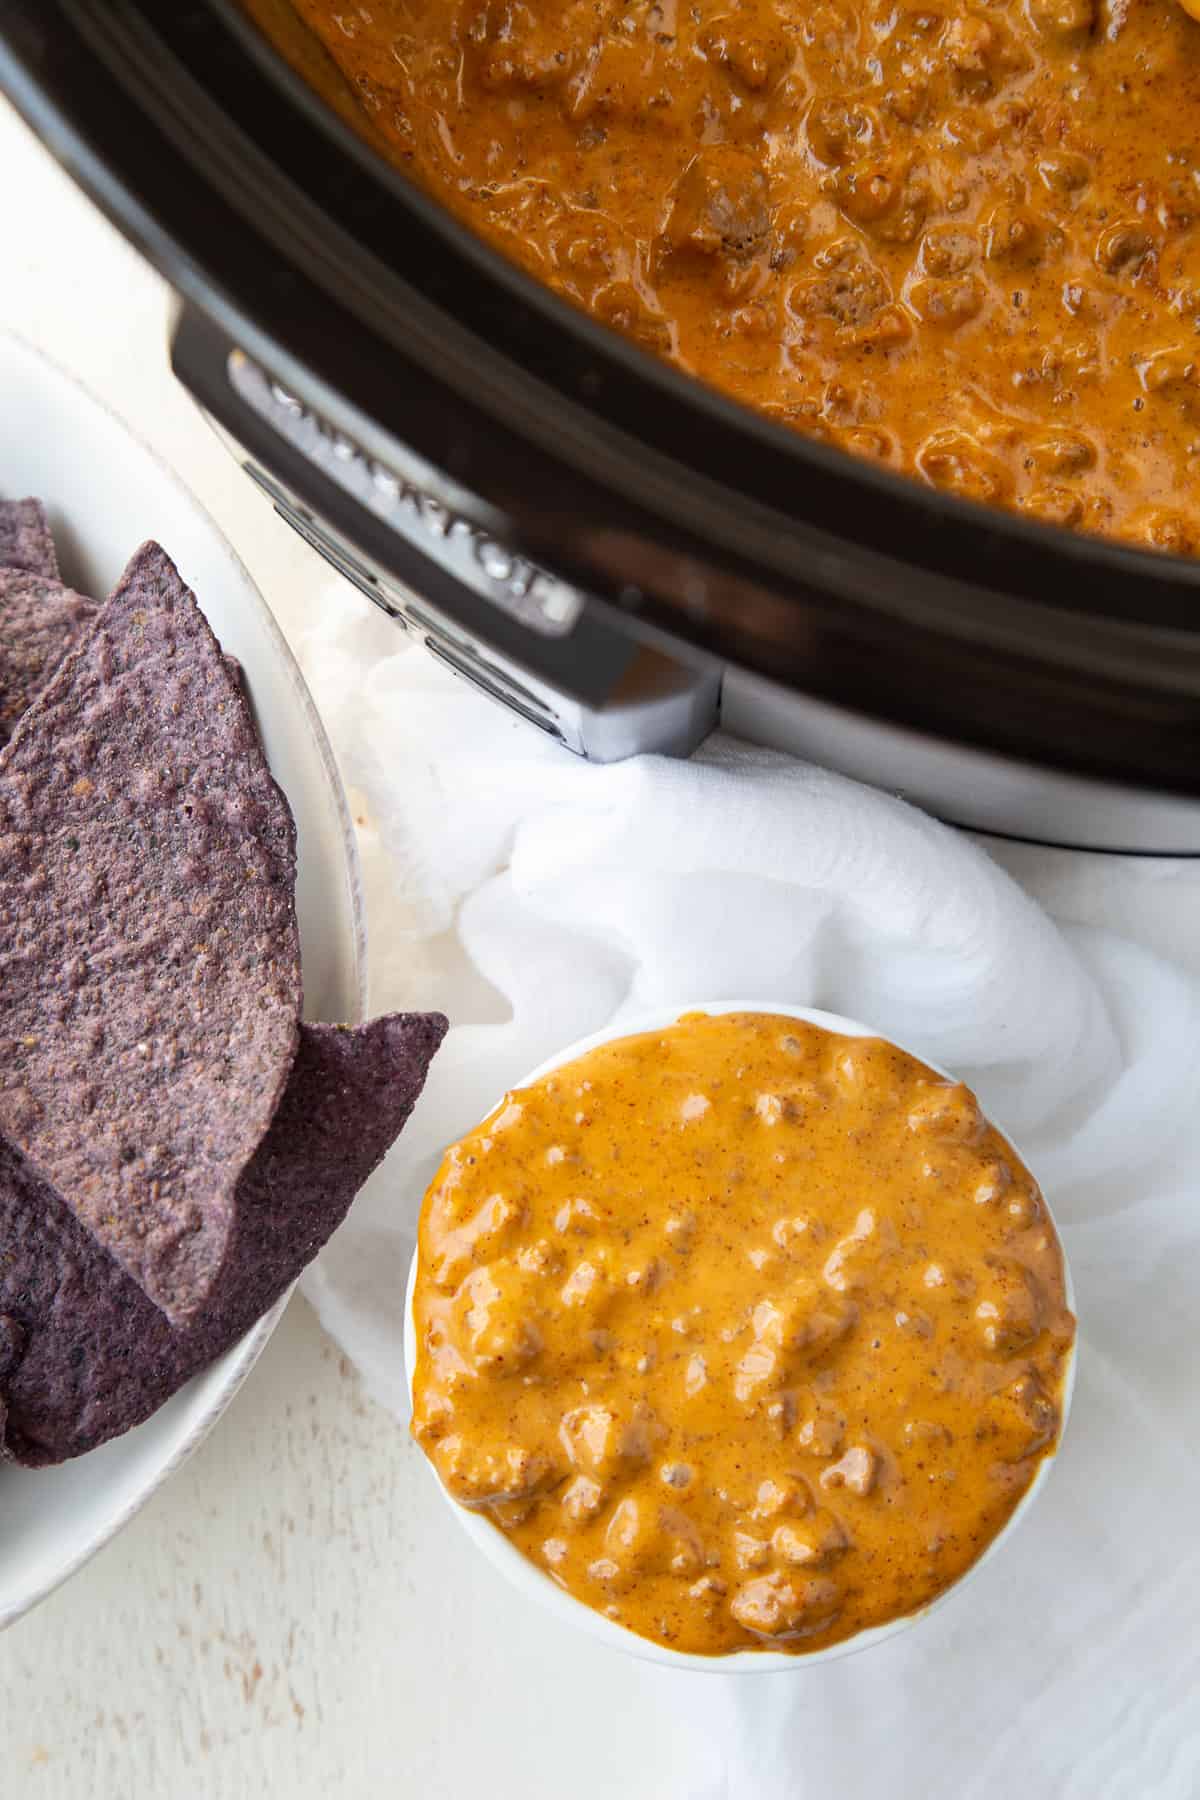 chili cheese dip in a ramekin next to a crockpot and a bowl of blue corn tortilla chips.